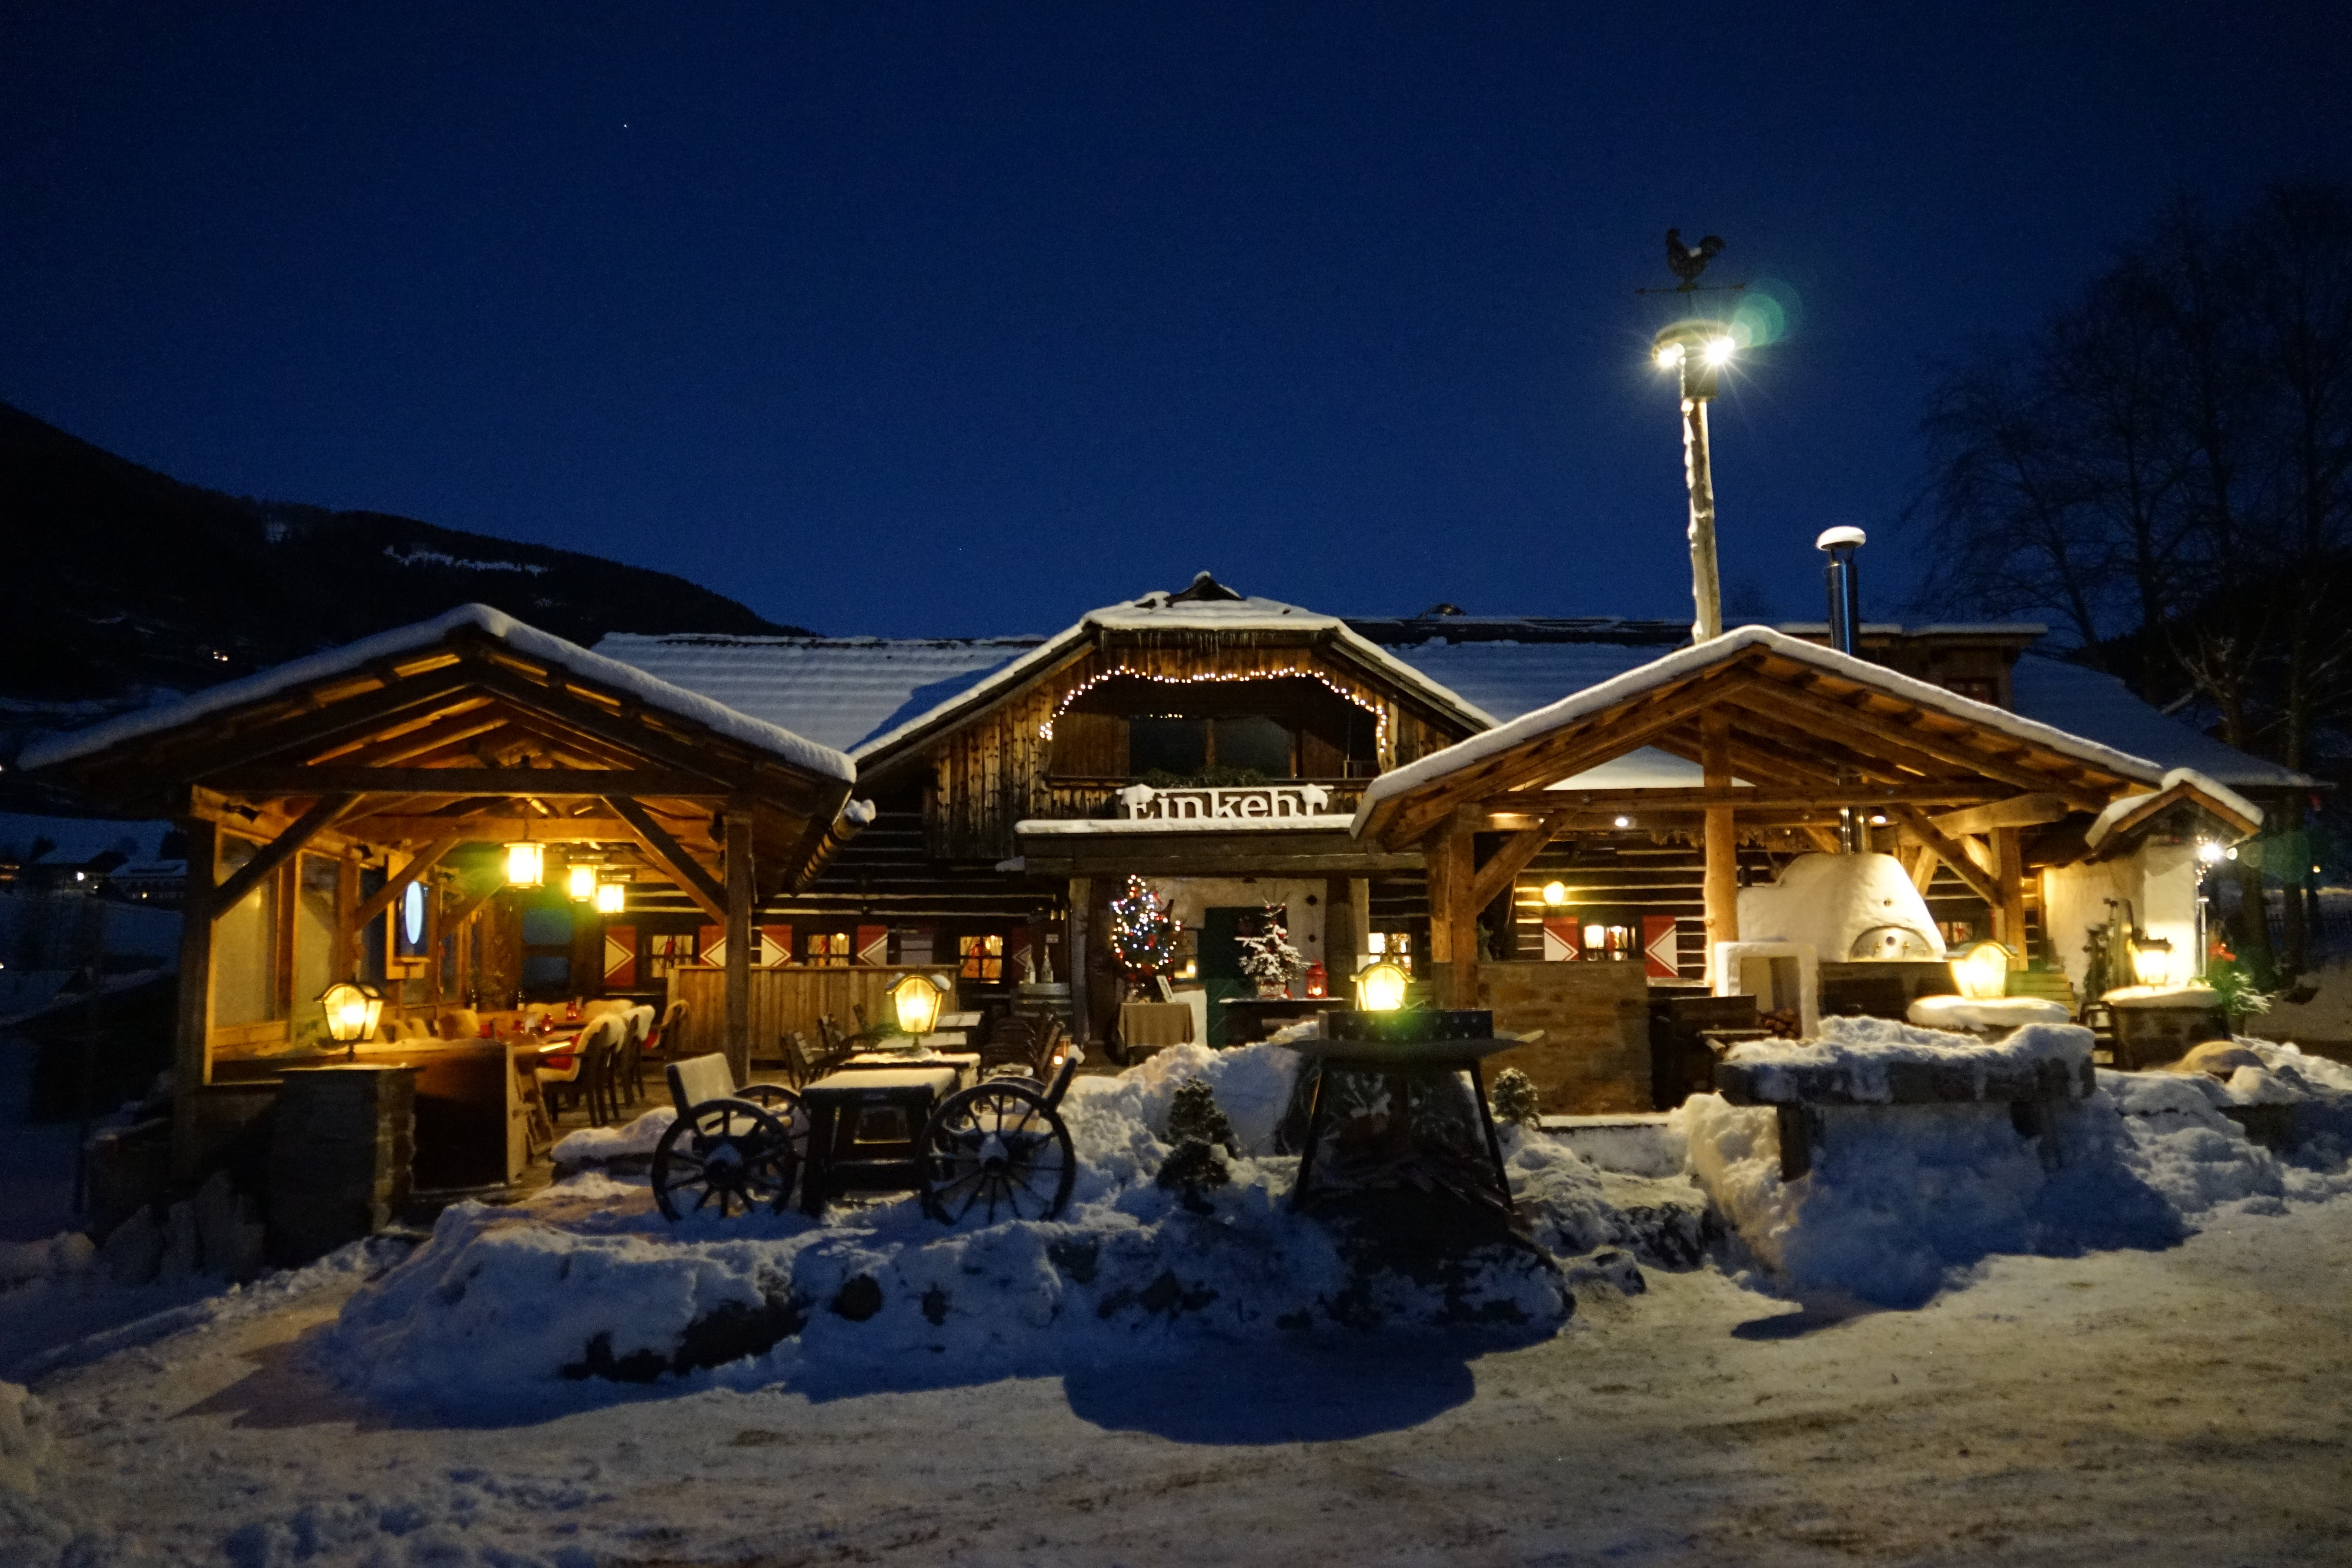 The restaurant Einkehr from the outside covered with snow